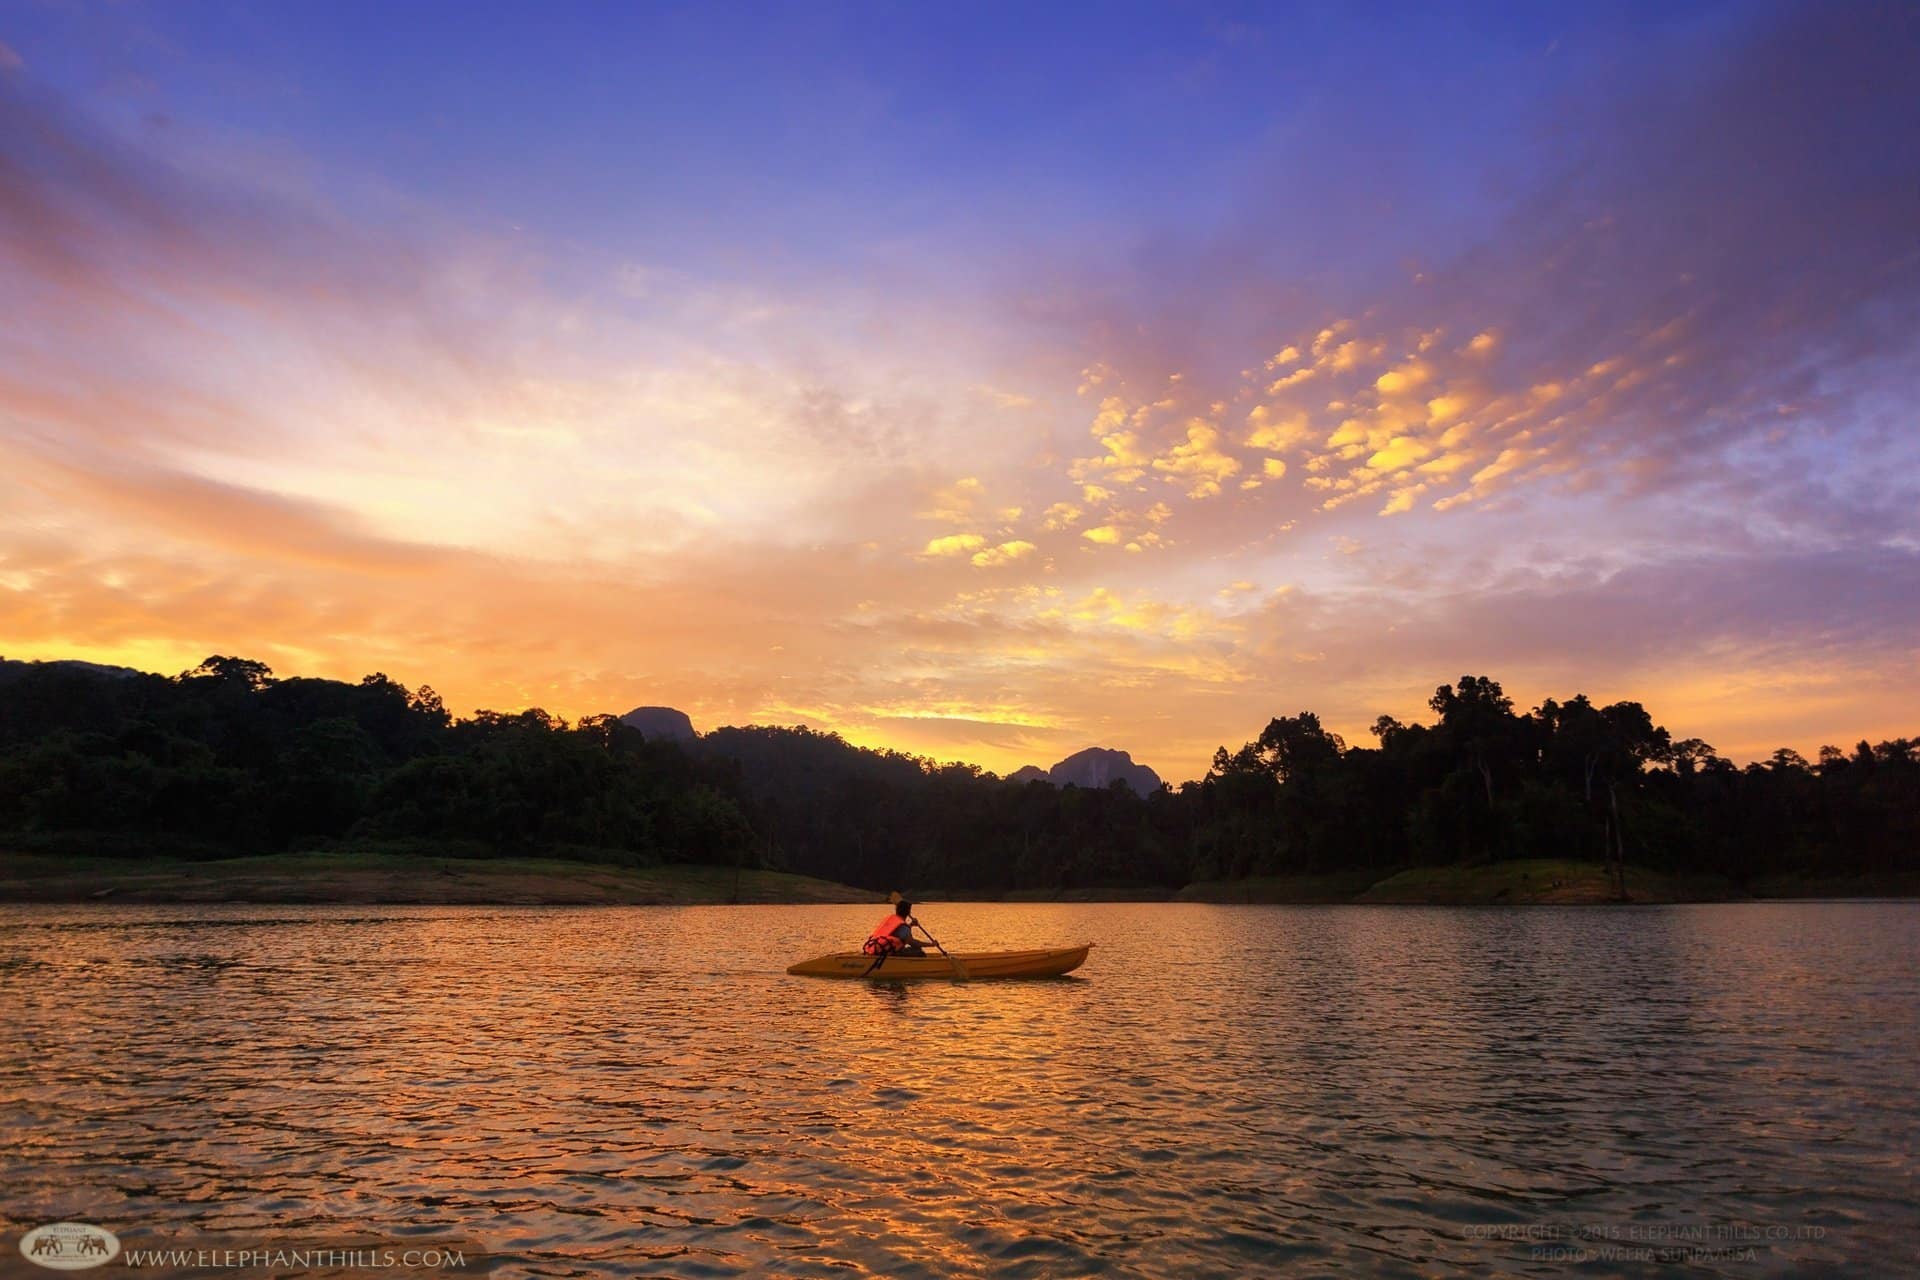 Activities in Khao Sok National Park include kayaking down the river and enjoying breathtaking rainforest views